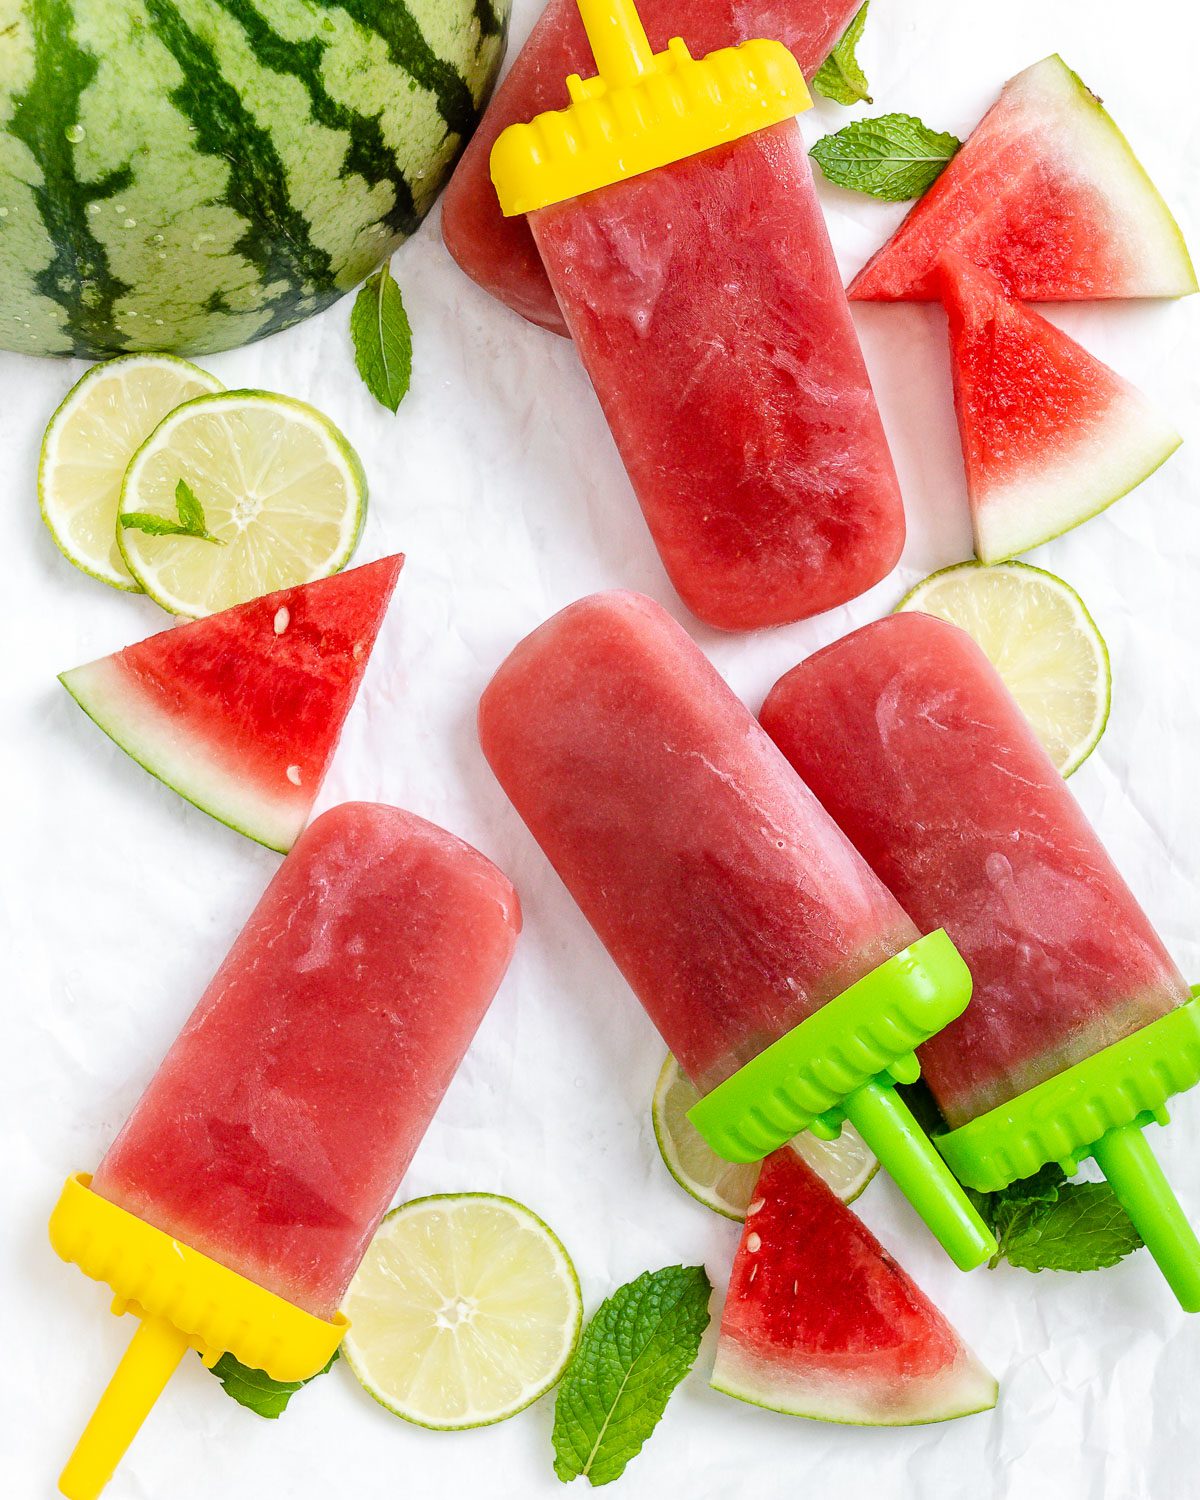 four completed Watermelon Popsicles with watermelon scattered in the background